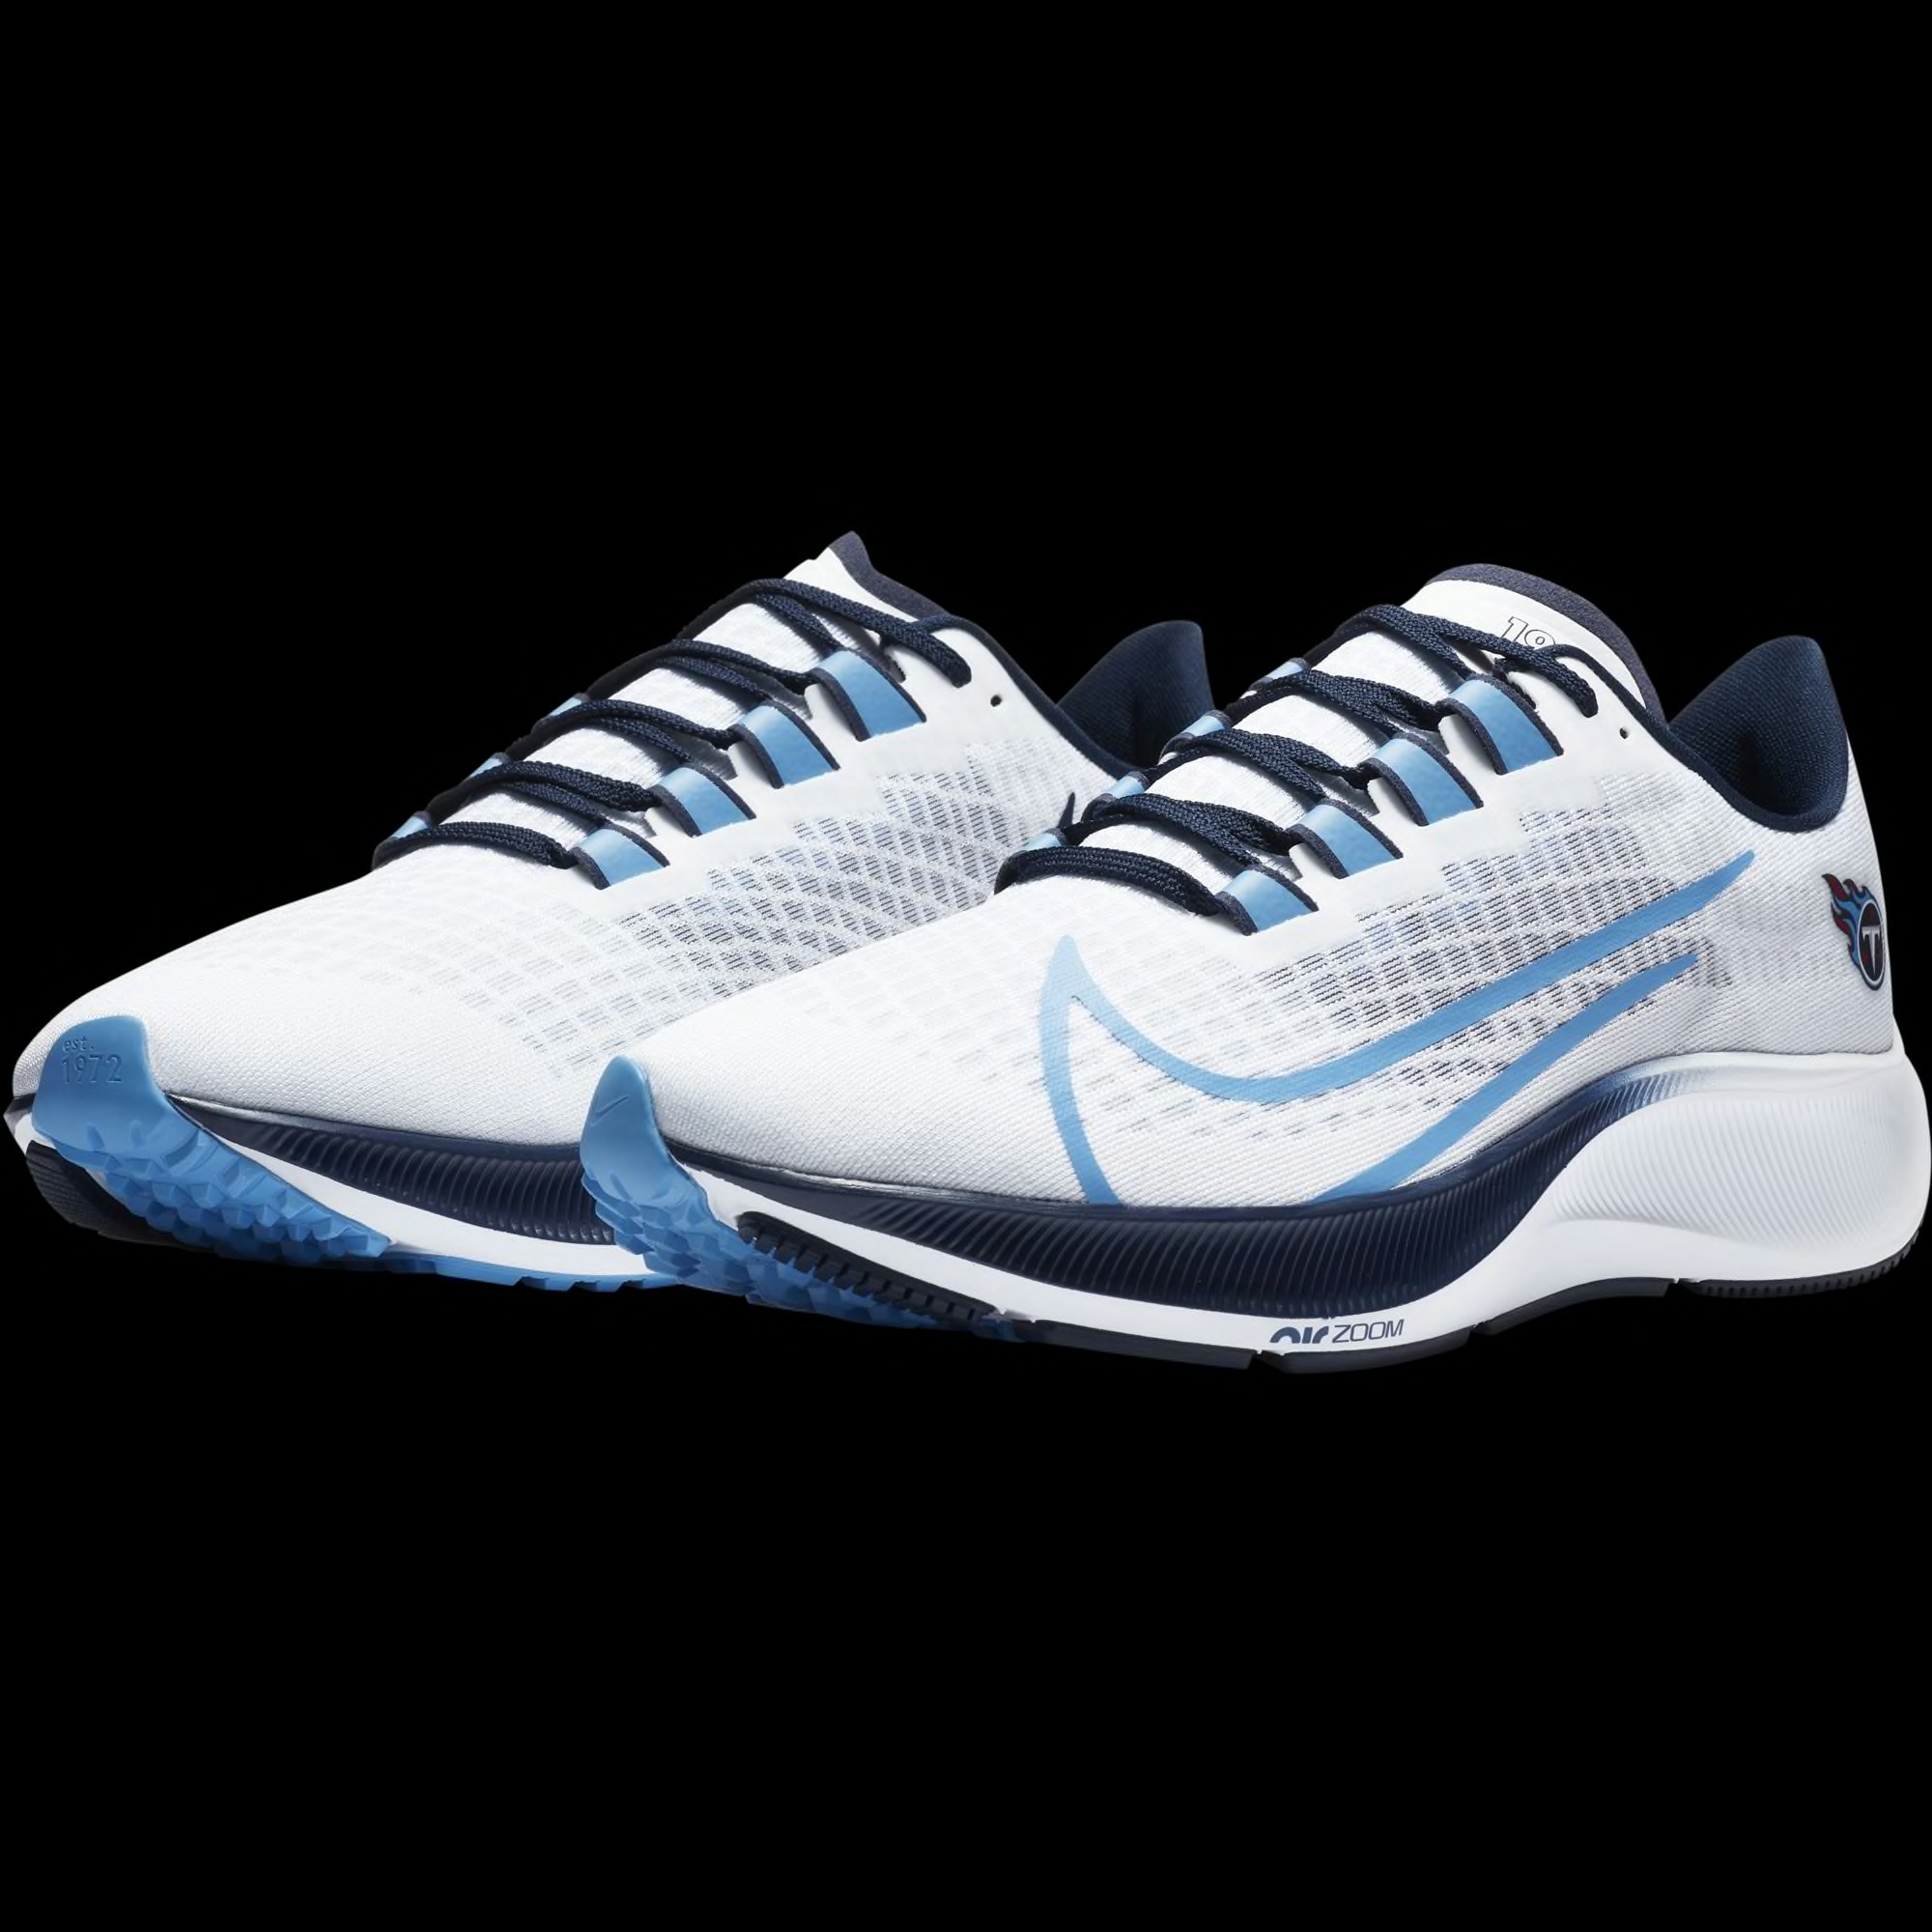 These new Tennessee Titans Nikes awesome shoes